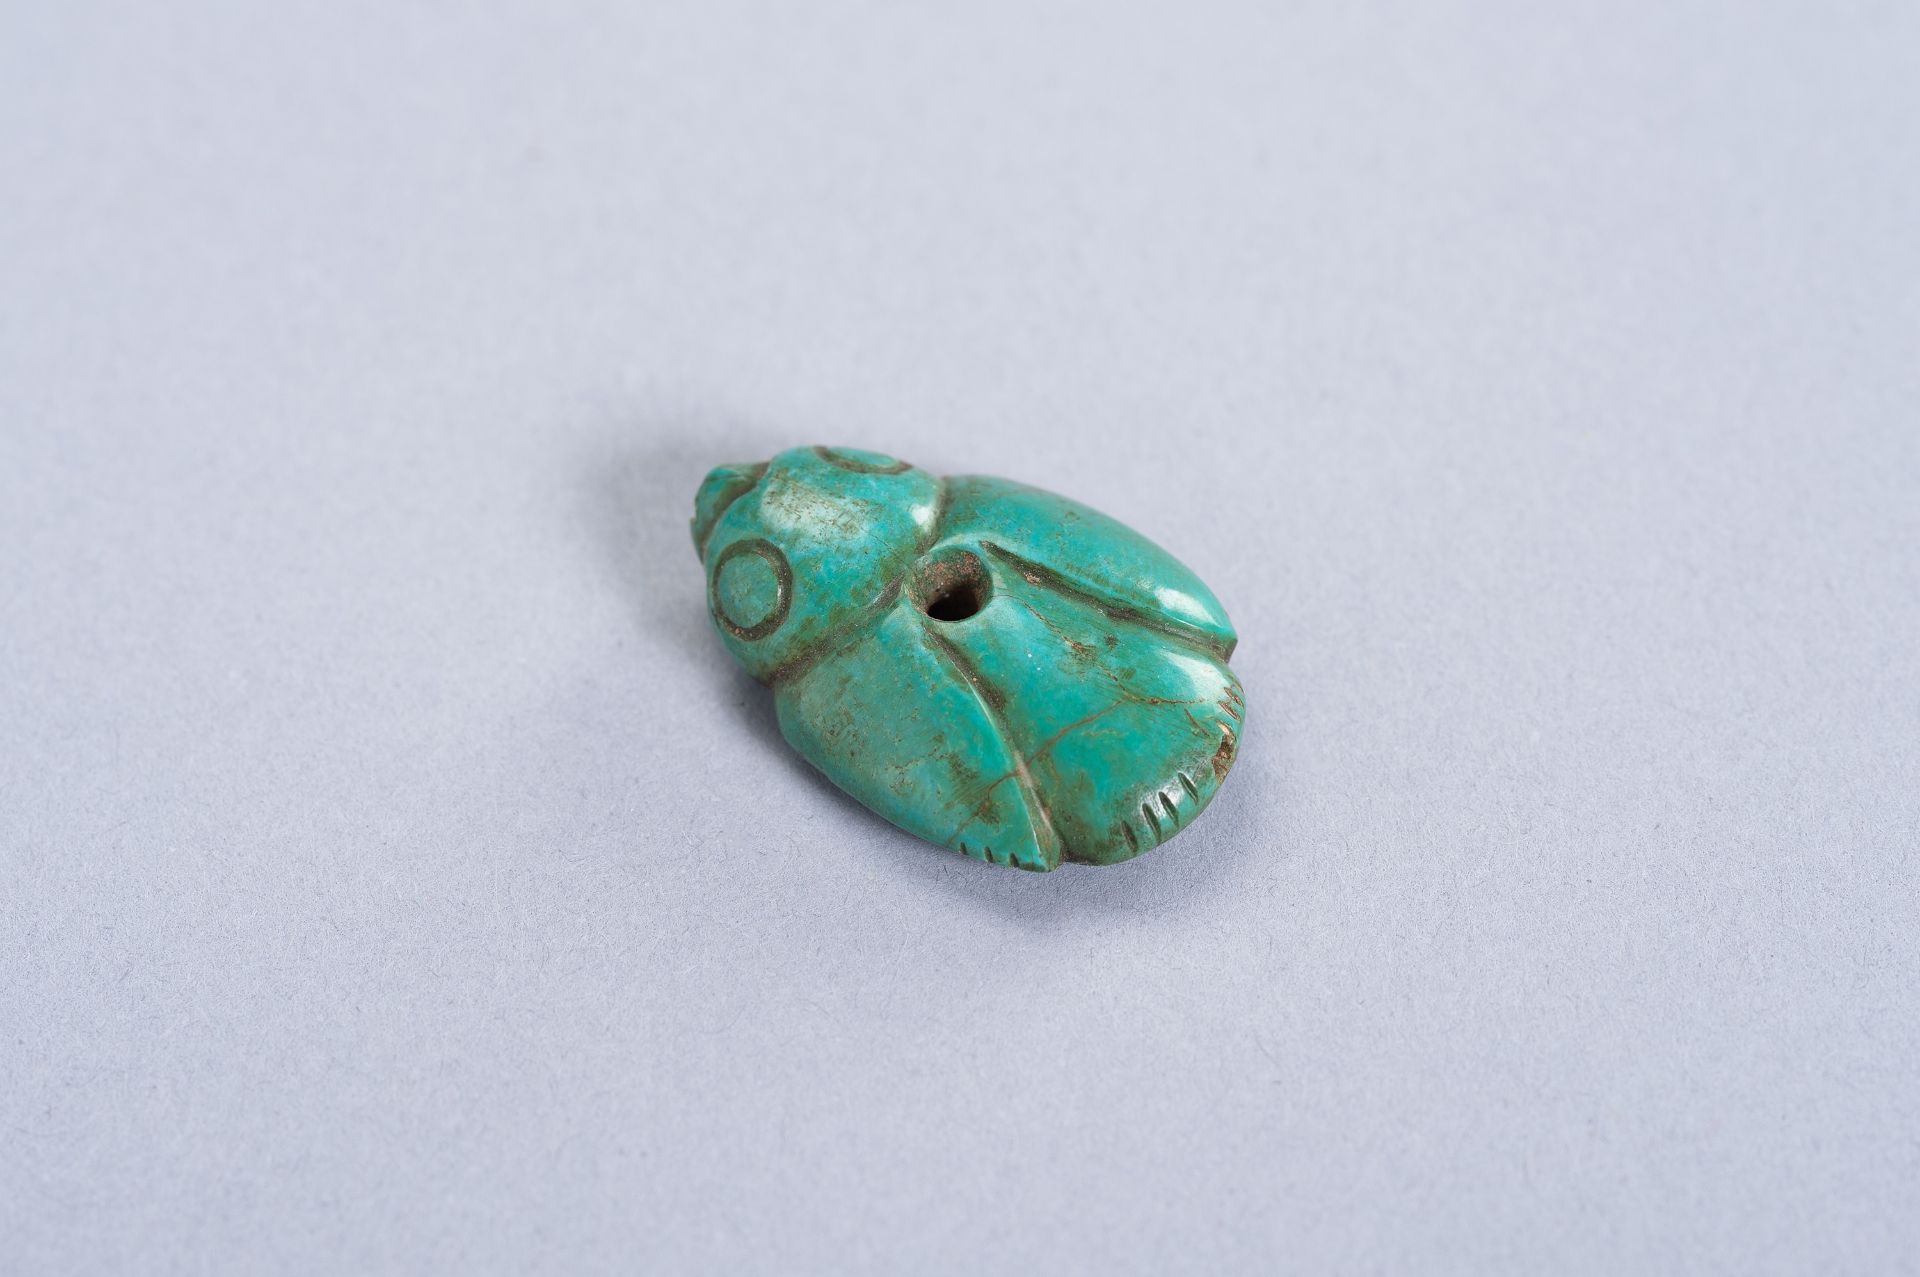 A TURQUOISE PENDANT OF A BIRD - Image 2 of 7